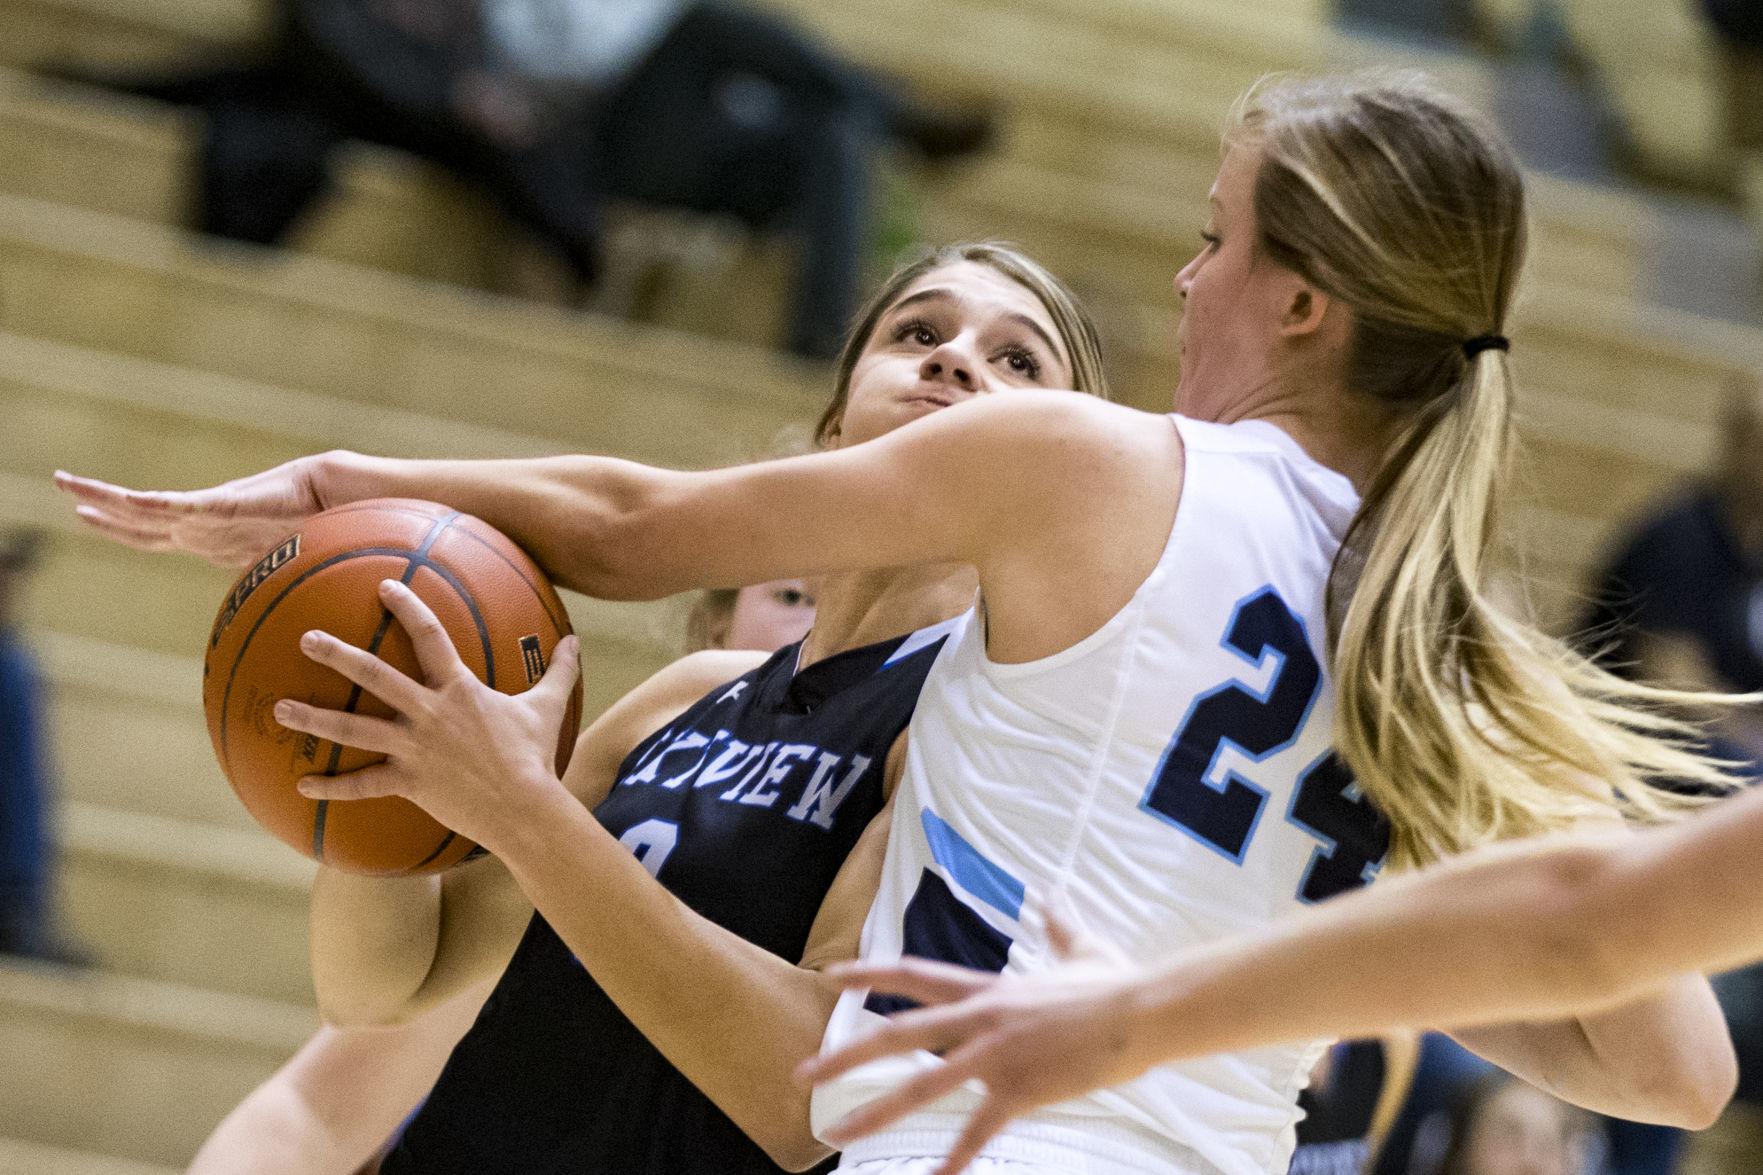 Close all the way, but Great Falls Bison edge Billings Skyview | Girls